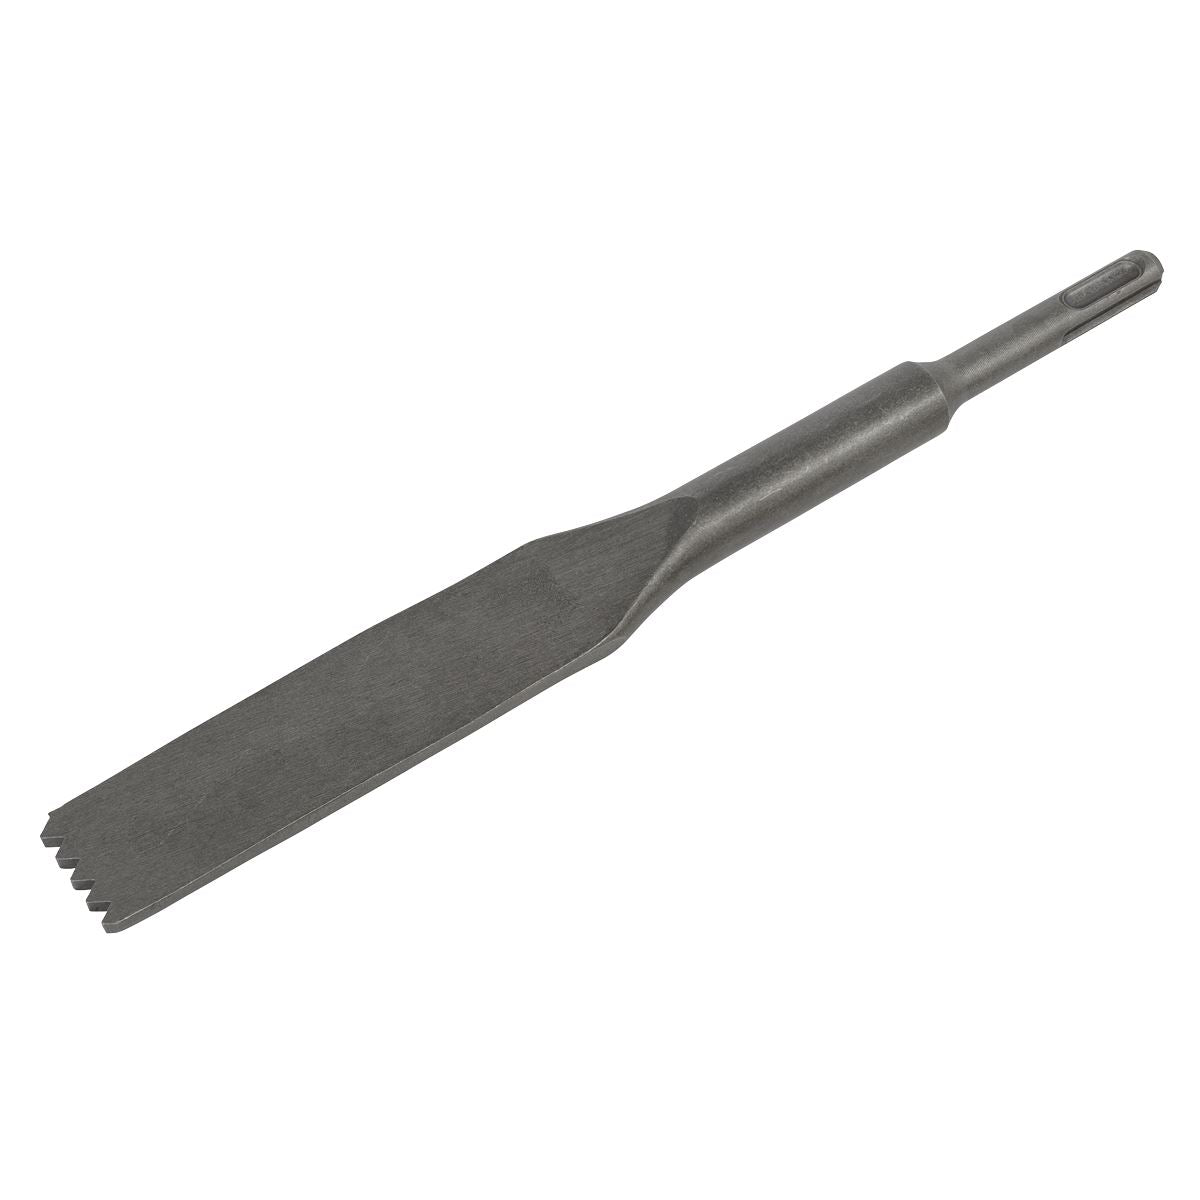 Worksafe by Sealey Toothed Mortar/Comb Chisel 30 x 250mm - SDS Plus